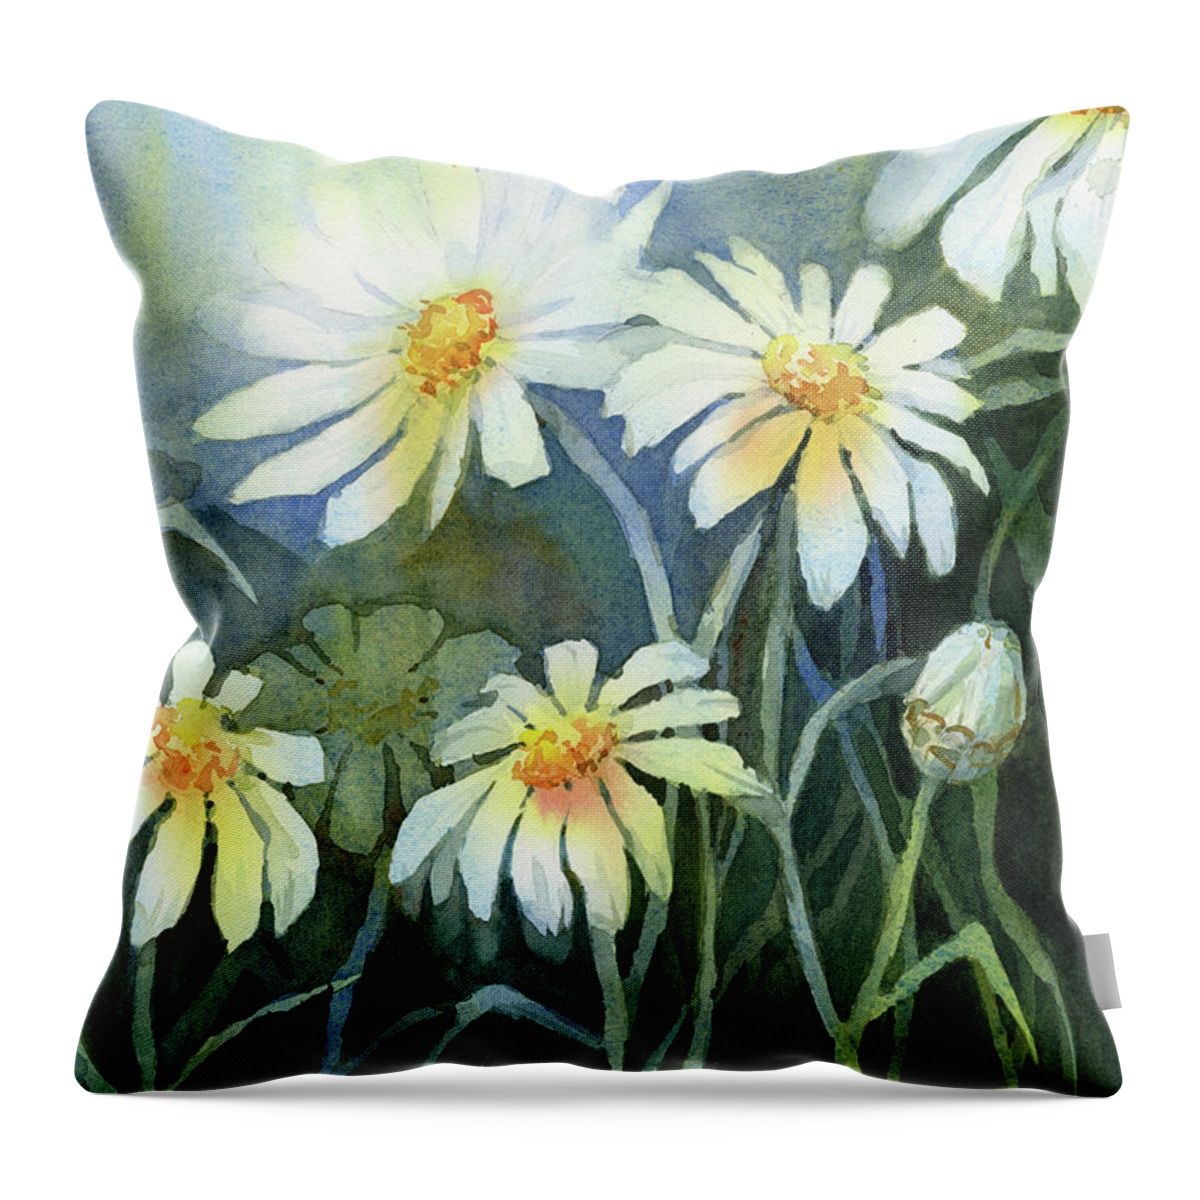 Daisies Throw Pillow featuring the painting Daisies Flowers by Olga Shvartsur